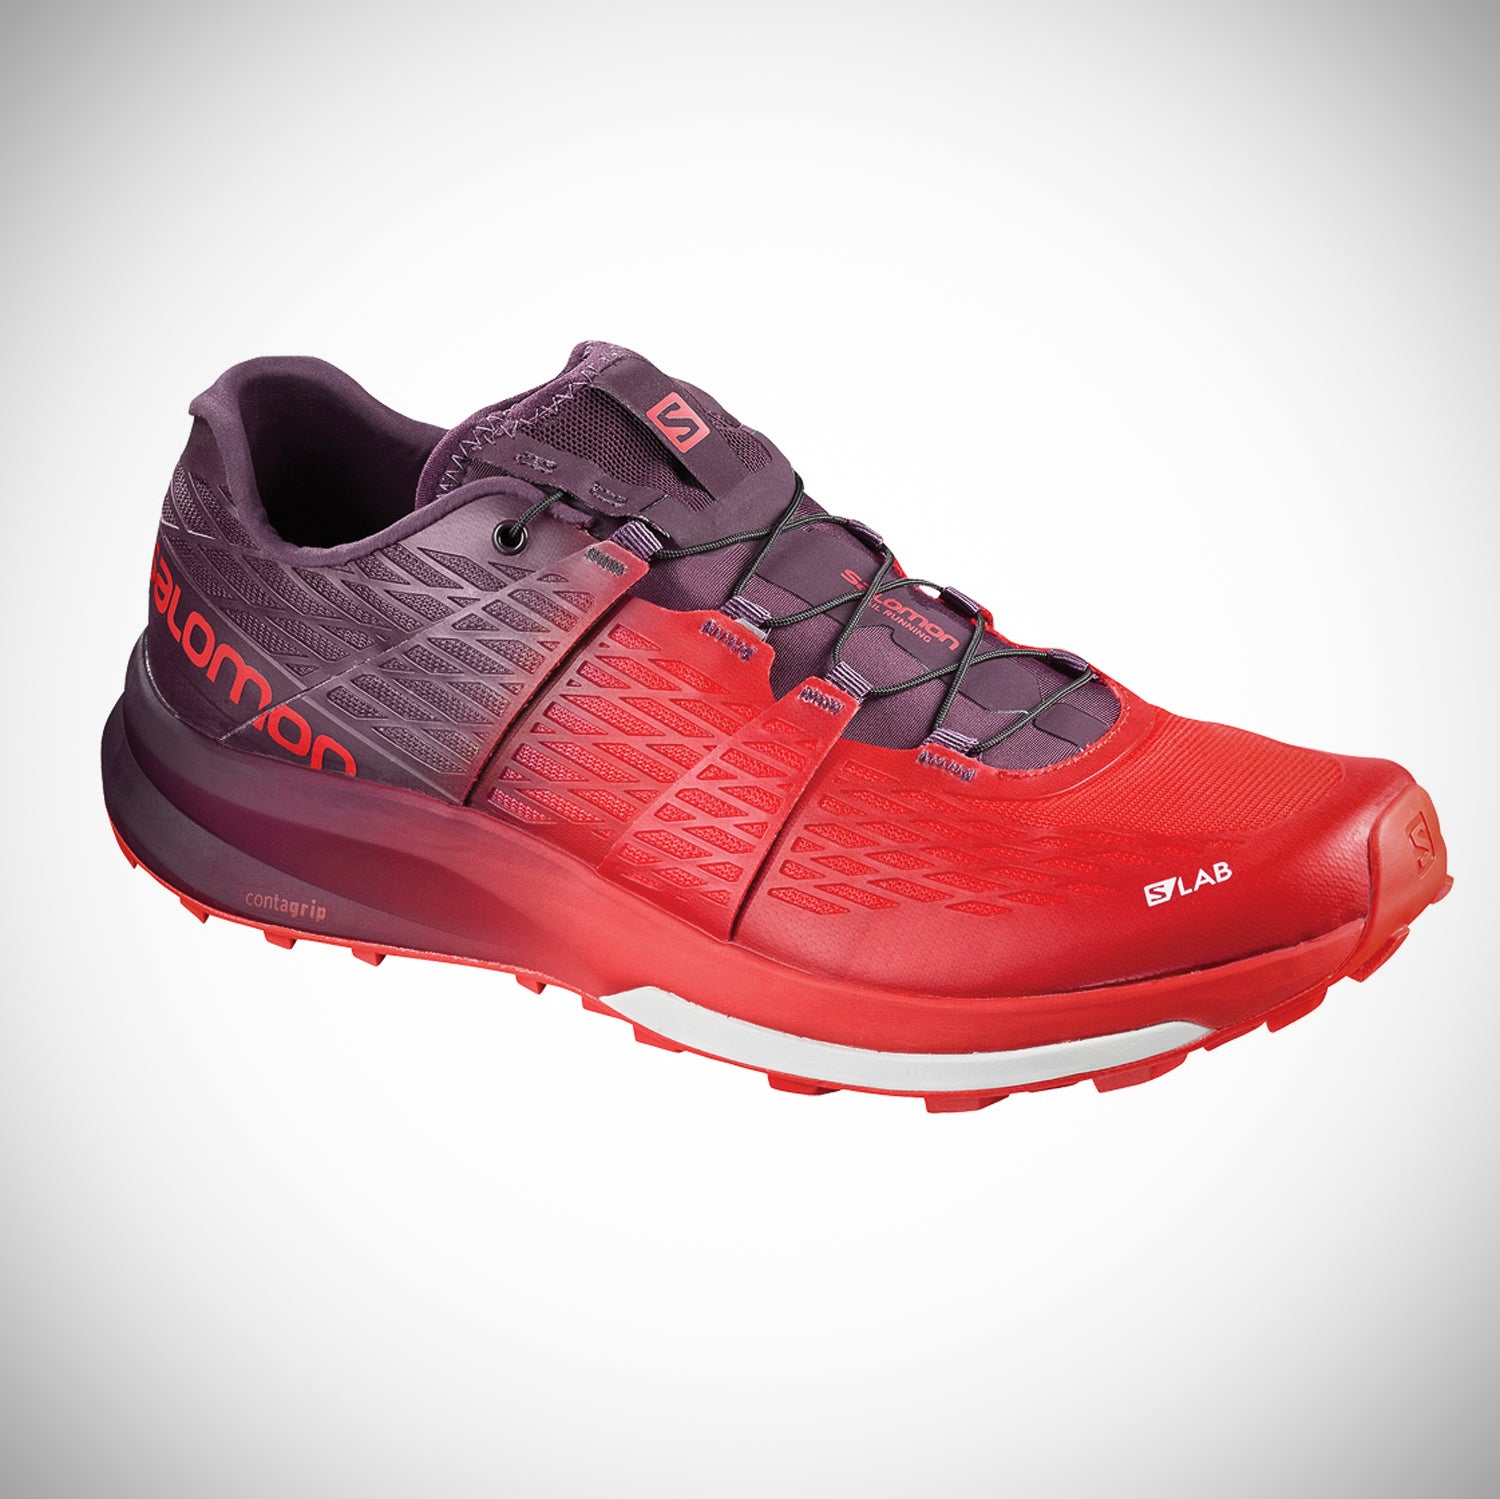 Preview: Salomon's Ultra and Pro